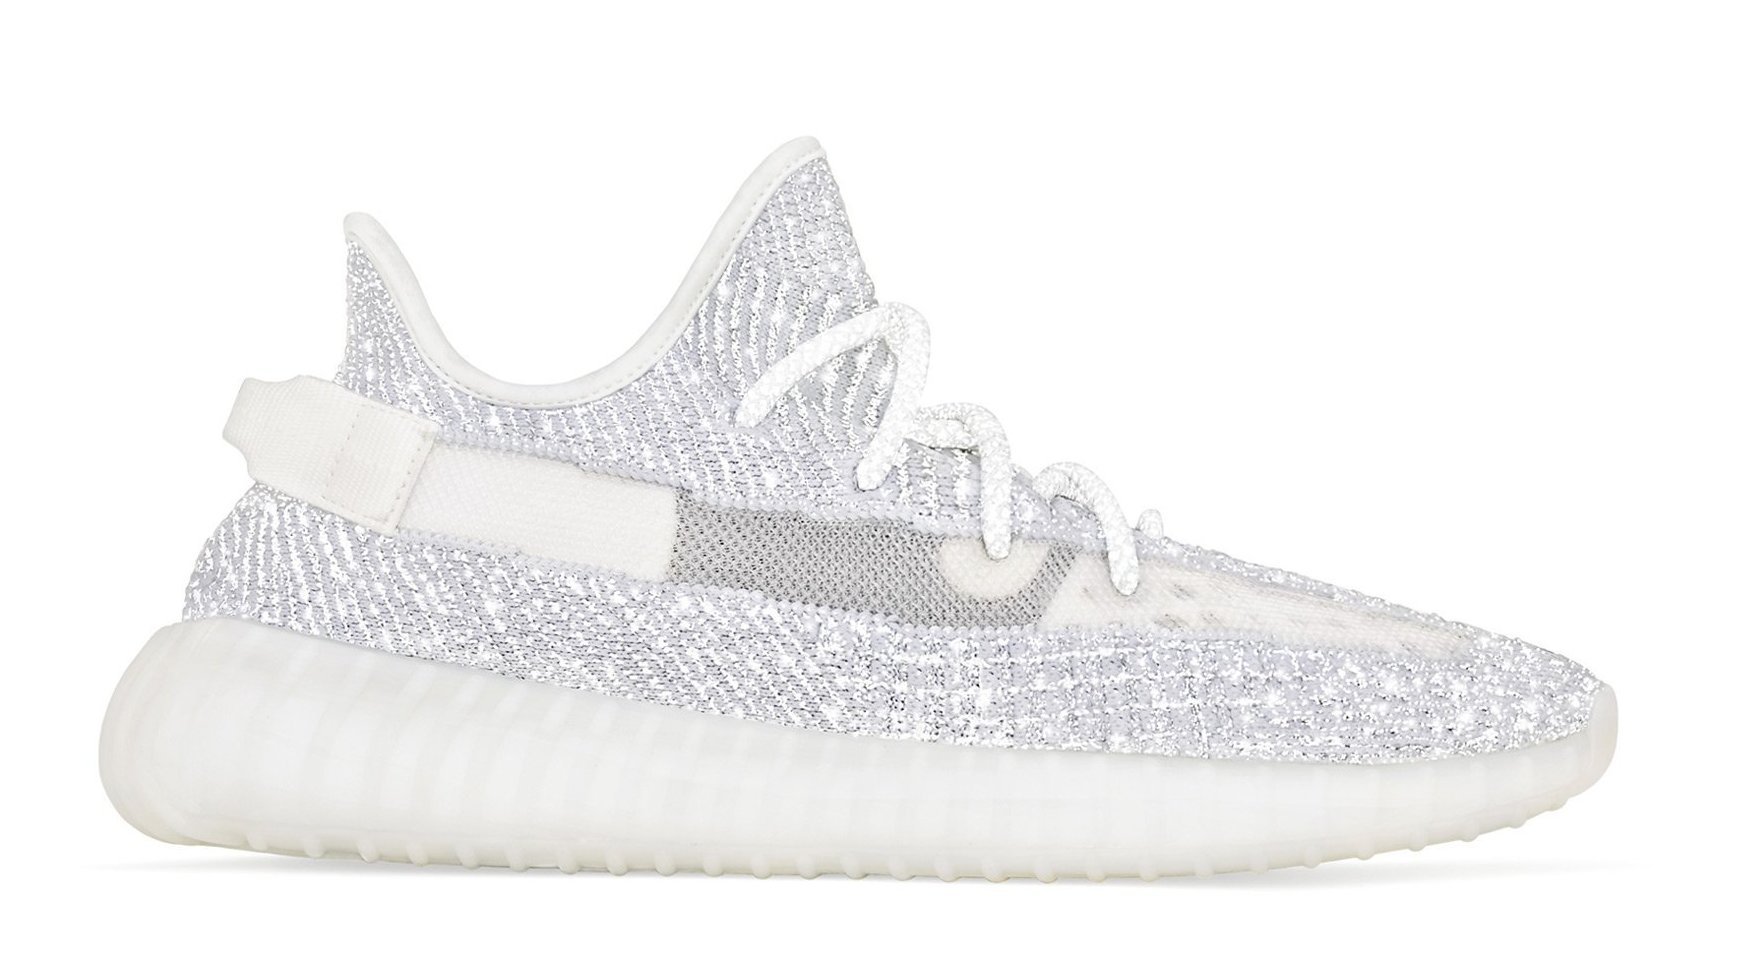 adidas yeezy boost 350 v2 static 3m reflective lateral